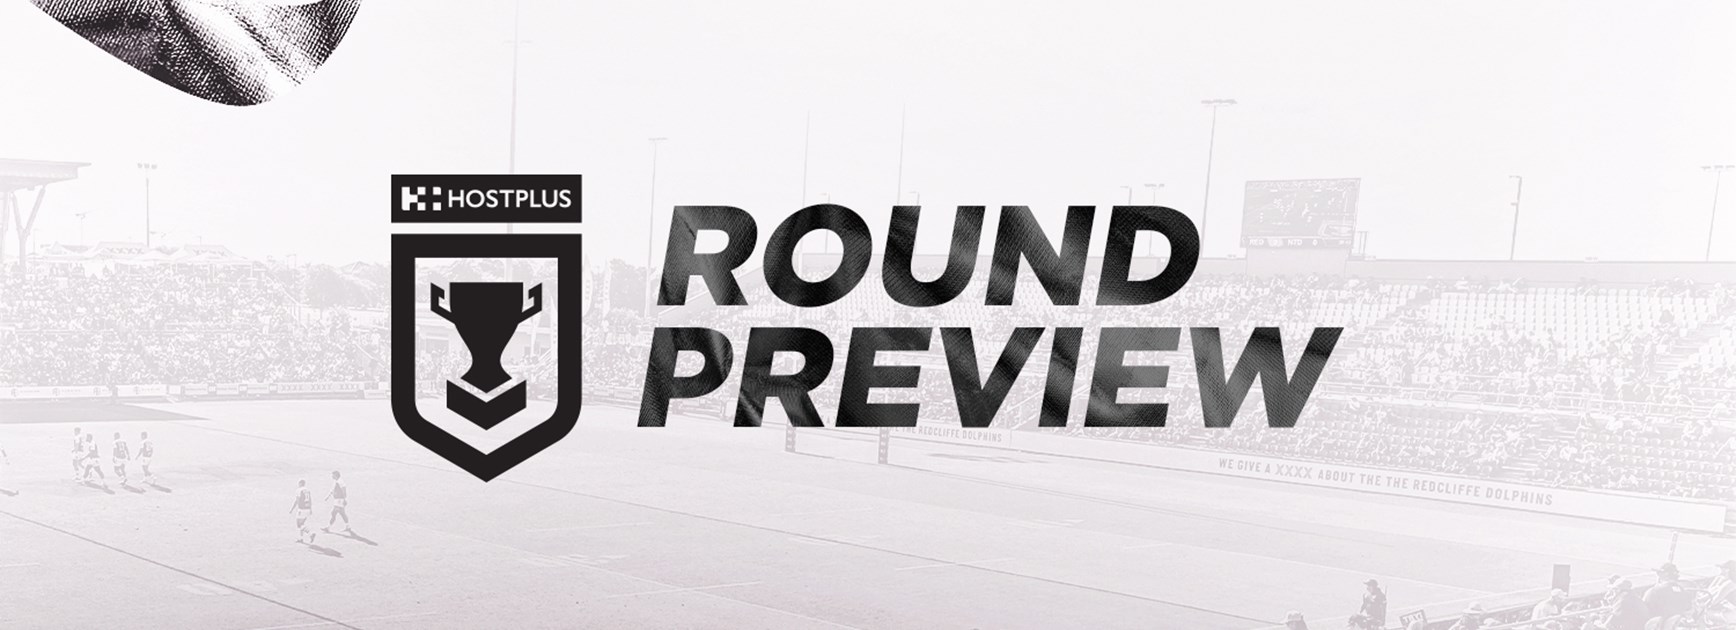 Hostplus Cup Round 11 preview